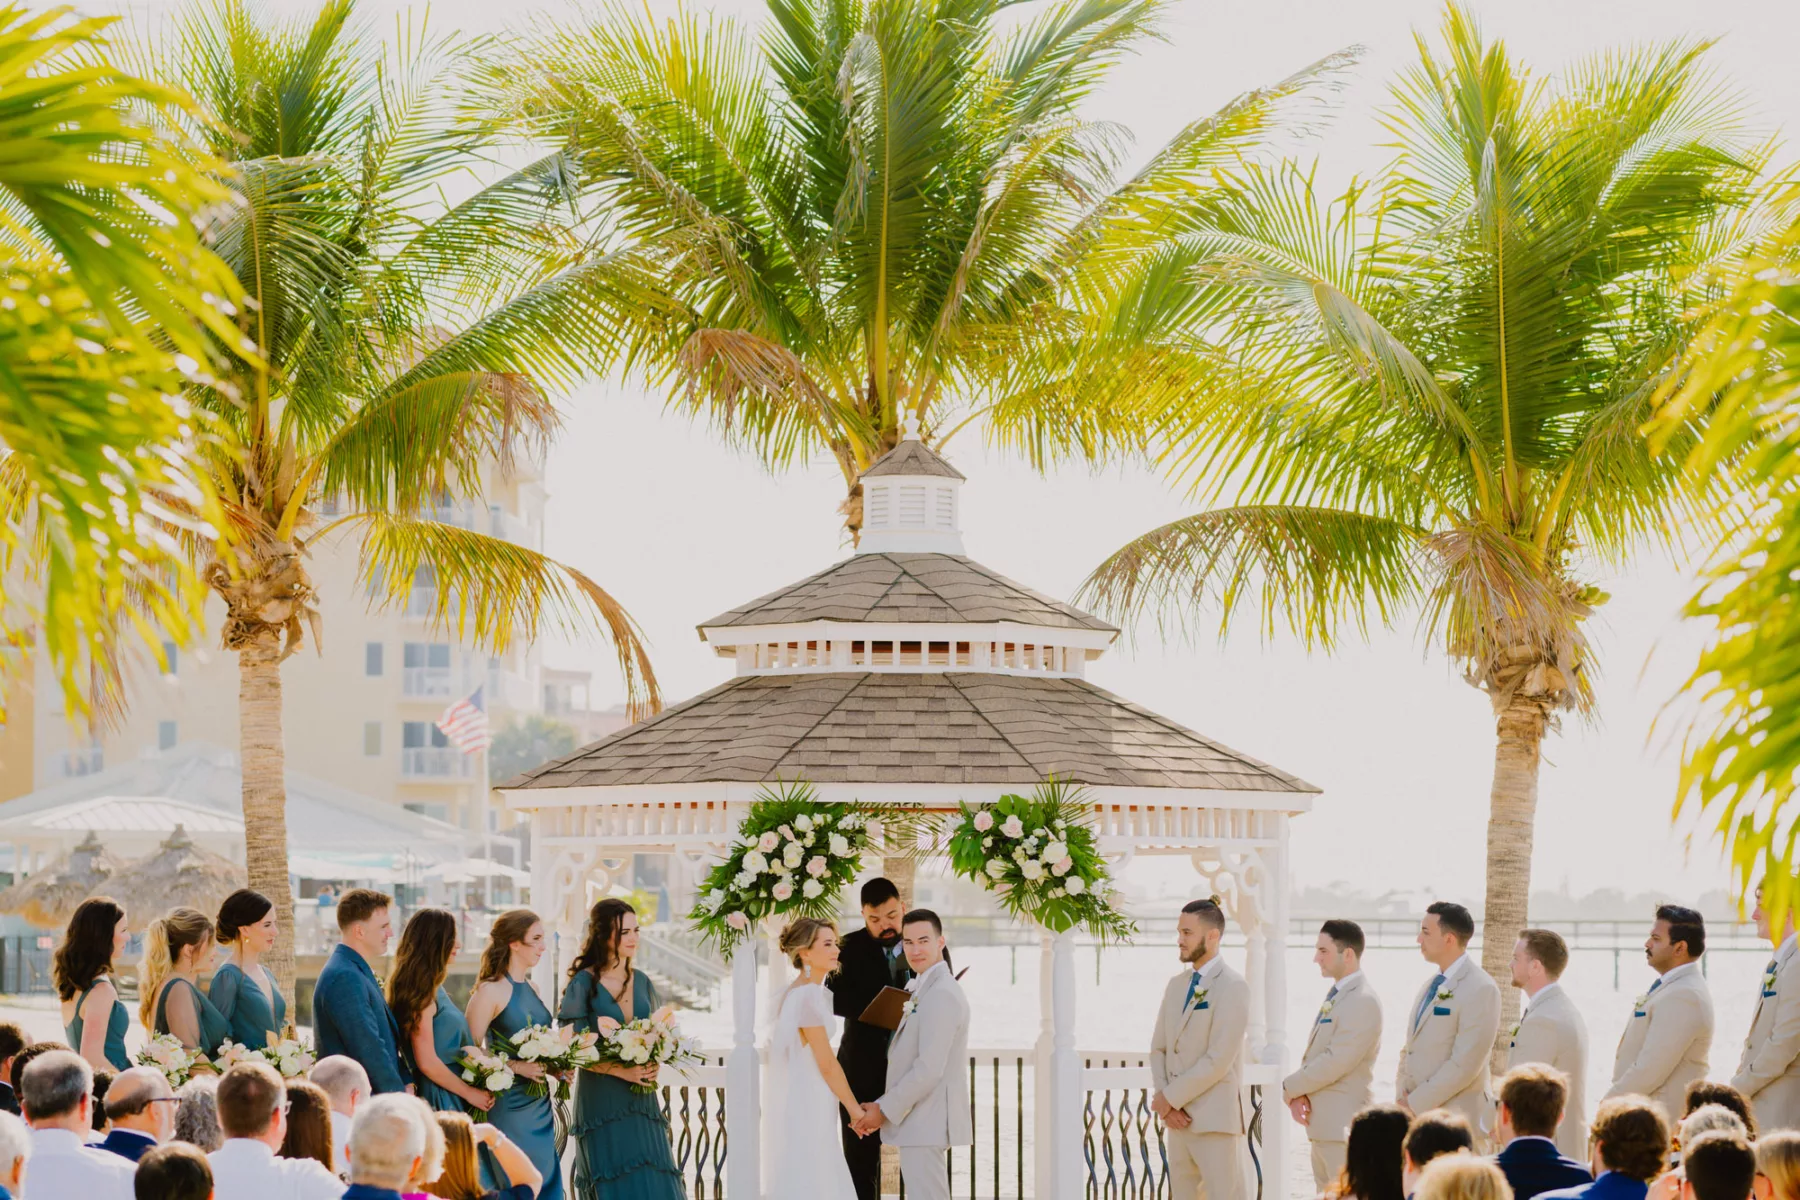 Bride and Groom Vow Exchange Tropical Beach Wedding Ceremony Inspiration | Pink and White Roses, Monstera, Palm Leaf Gazebo Spring Decor Ideas | Tampa Bay Florist Monarch Events and Design | Waterfront St Pete Venue Isla Del Sol Yacht and Country Club